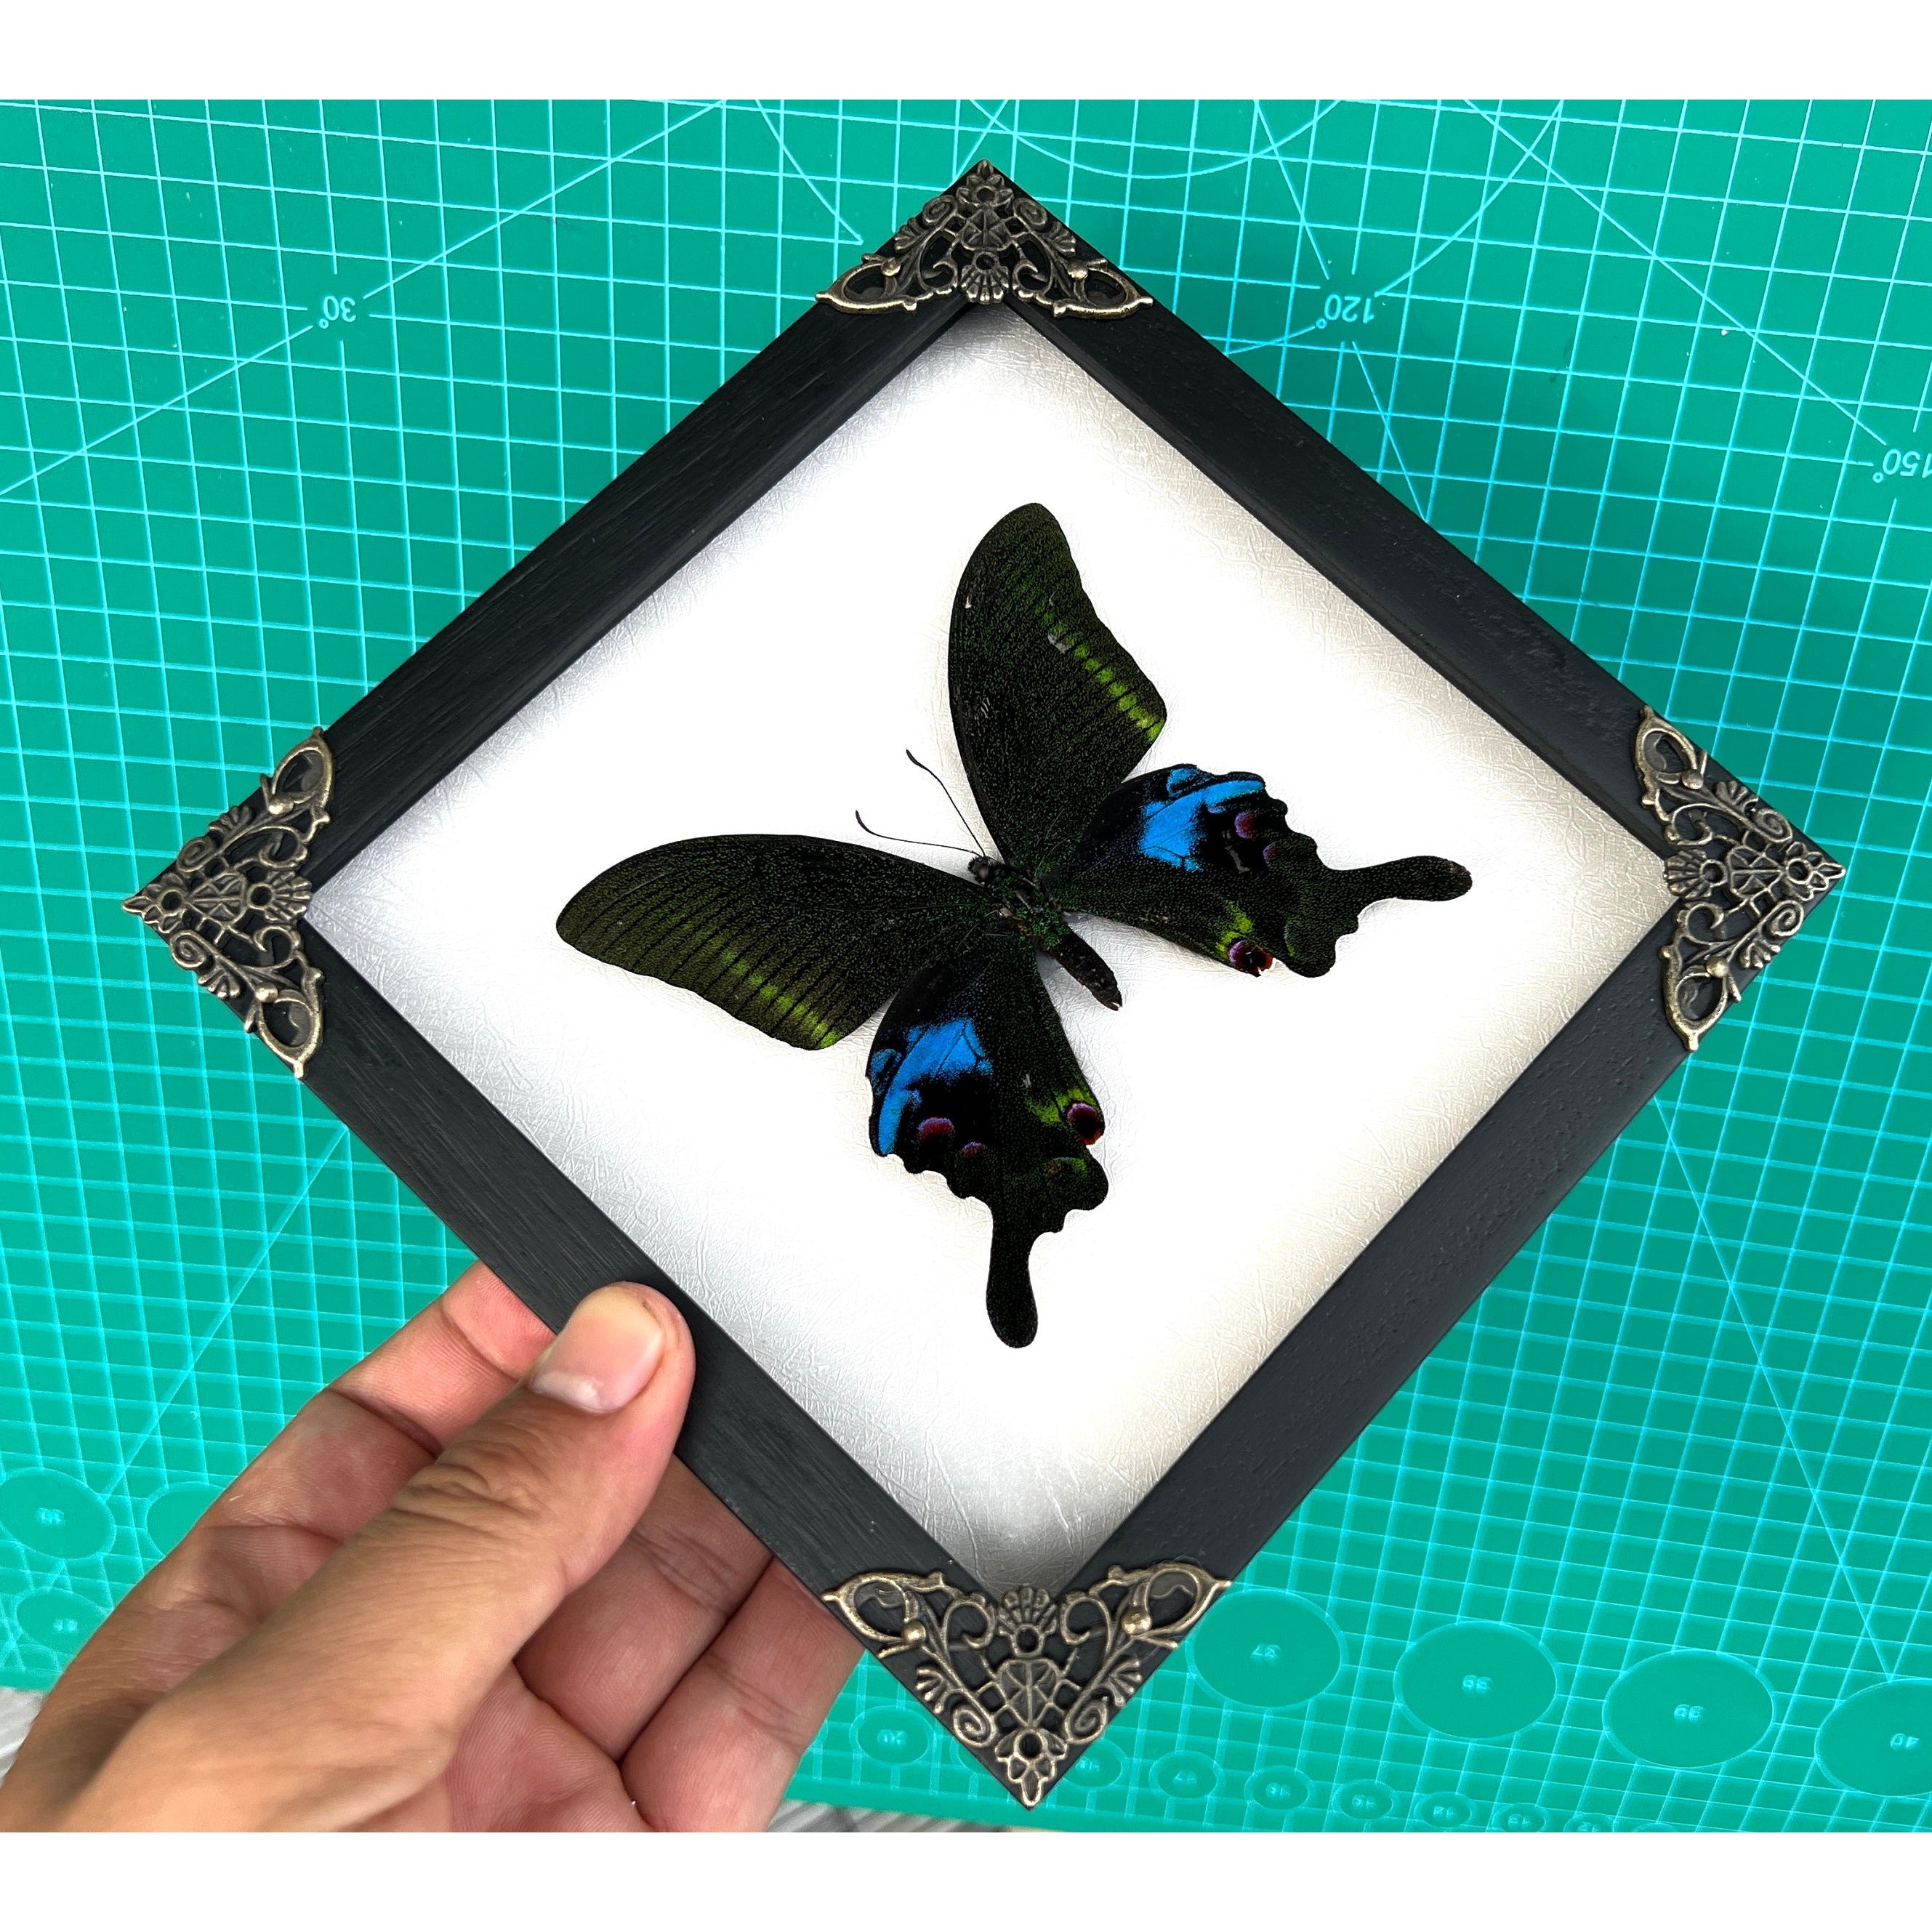 Real Framed Butterfly Moth Dead Insect Shadow Box Taxidermy Specimen Oddity Curiosities Tabletop Wall Art Hanging Collection Home Decor Living Gallery K16-15-TR - Vinacreations